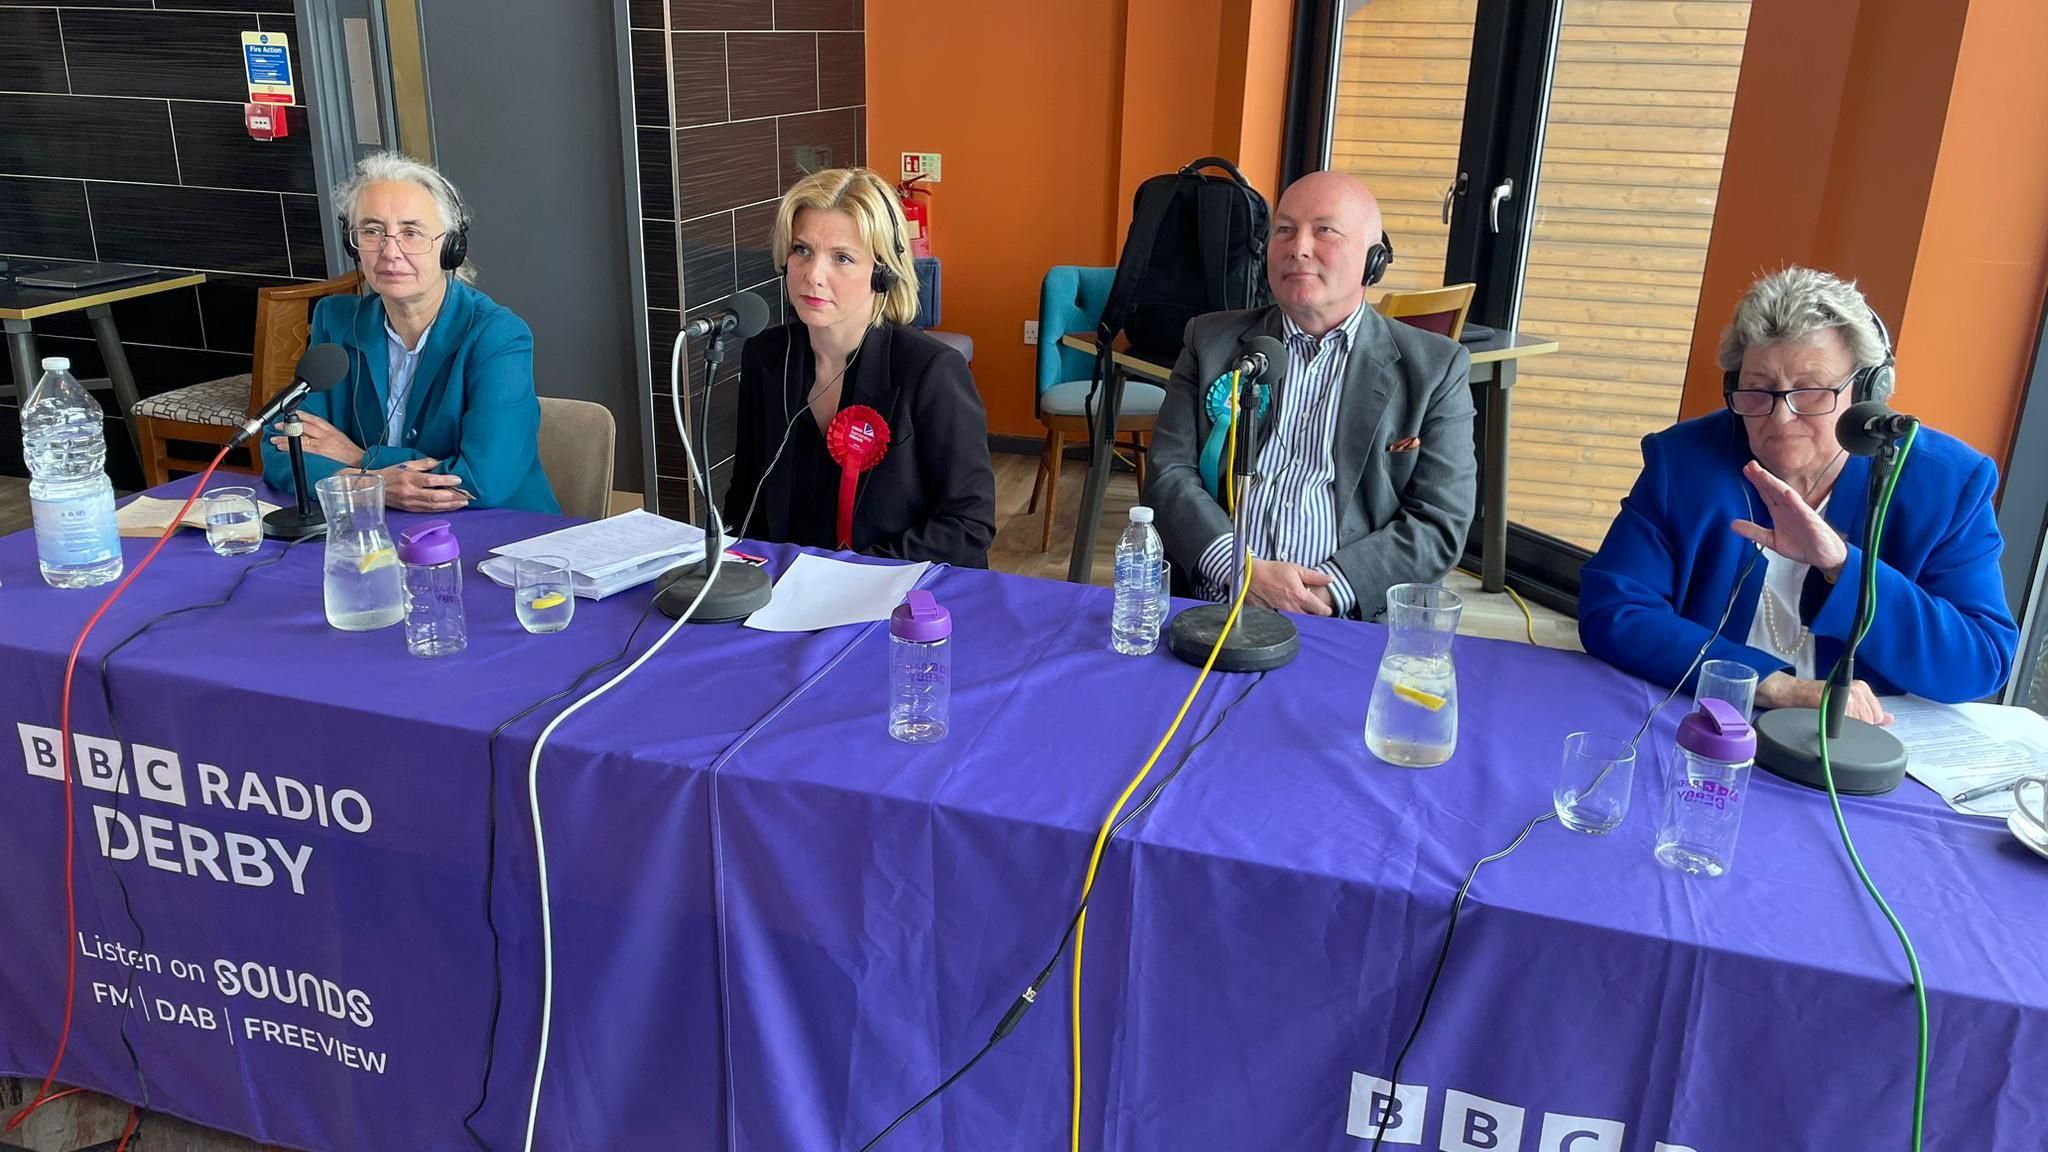 Election candidates Lucy Care, Samantha Niblett, Job West and Heather Wheeler debate at Mercia Marina